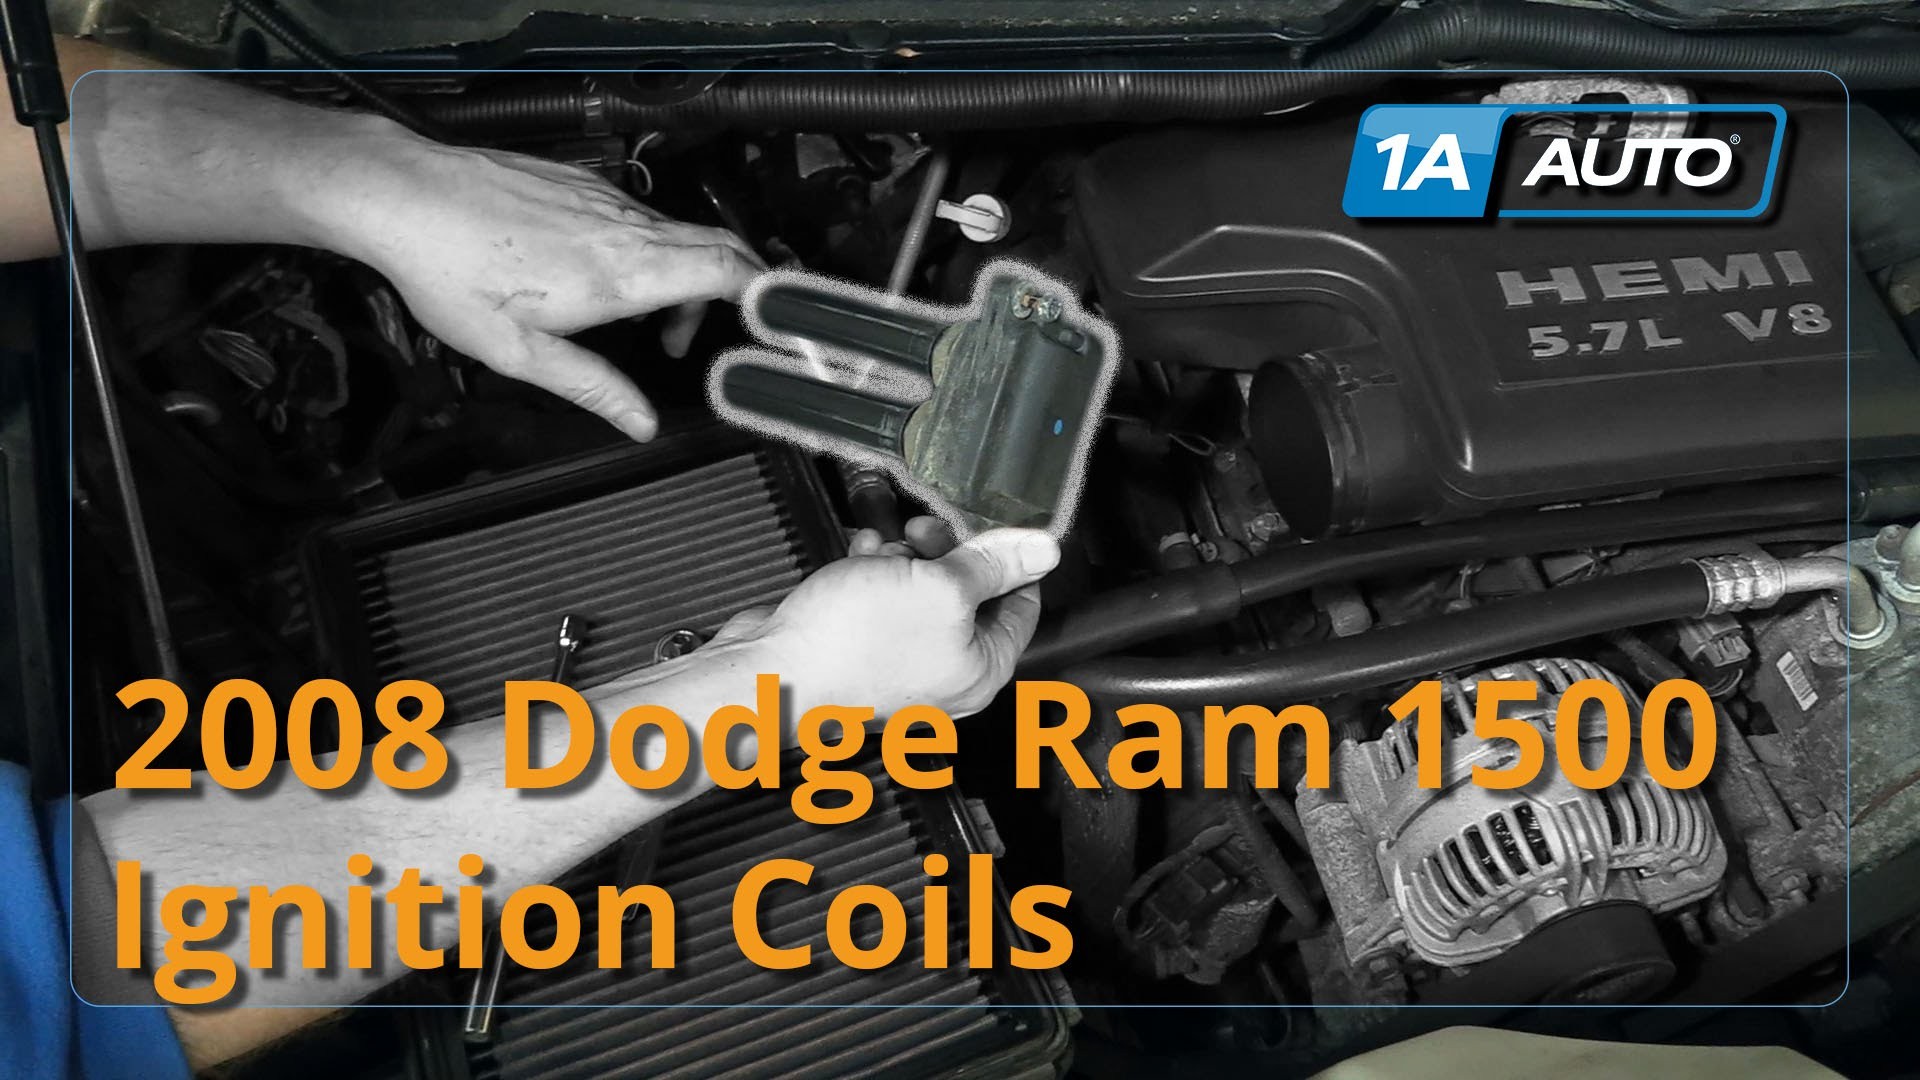 How to Install Replace Ignition Coils Dodge Ram 1500 Hemi 5 7L BUY QUALITY AUTO PARTS AT 1AAUTO